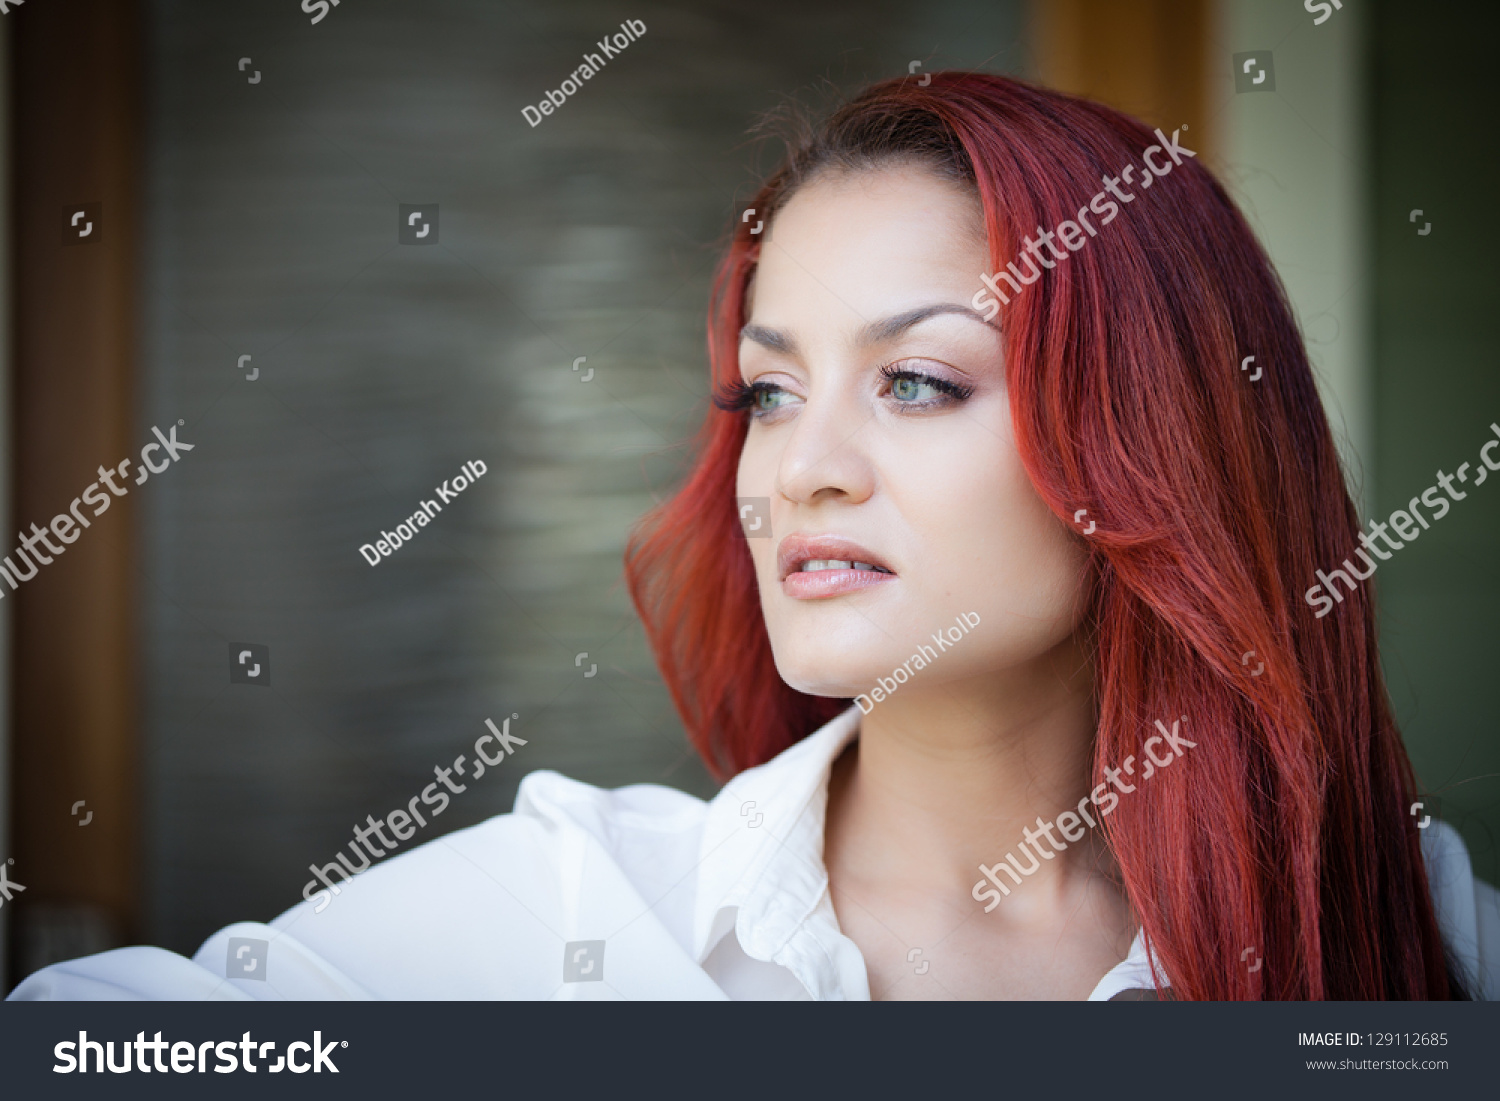 http://image.shutterstock.com/z/stock-photo-beautiful-latin-woman-looking-off-to-the-side-profile-view-129112685.jpg